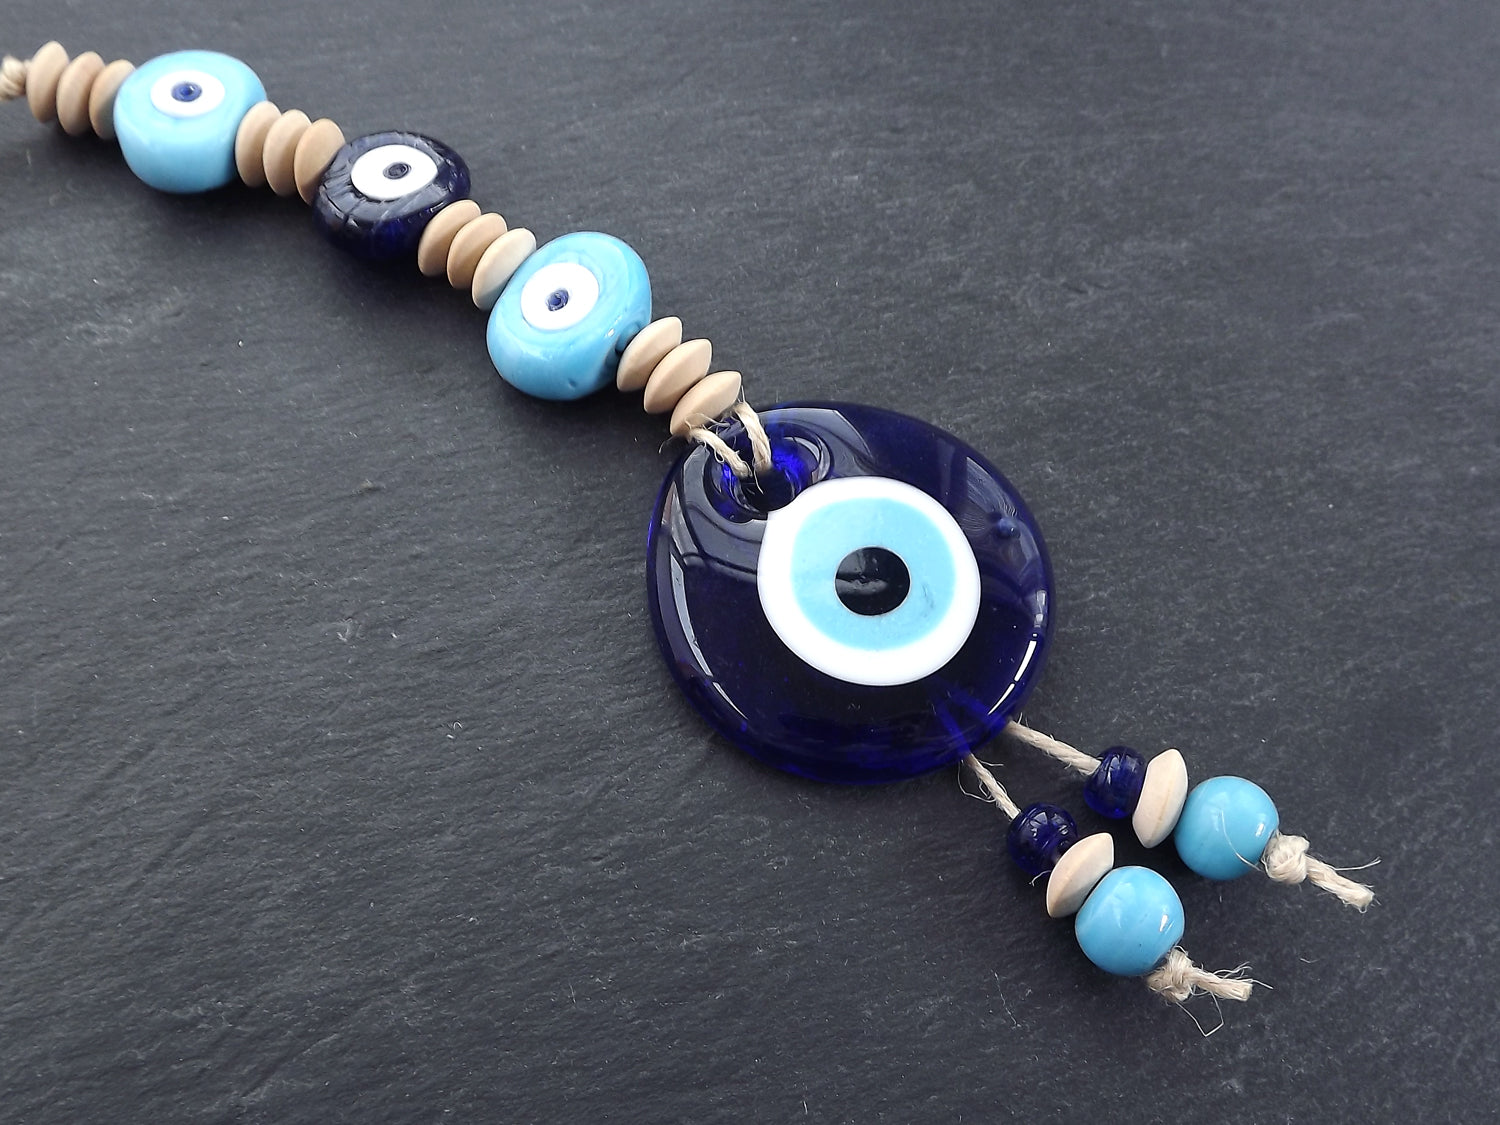 Sky Blue Navy Turkish Evil Eye Wall Hanging Home Garden Decoration with Evileye Traditional Artisan Beads - No:51